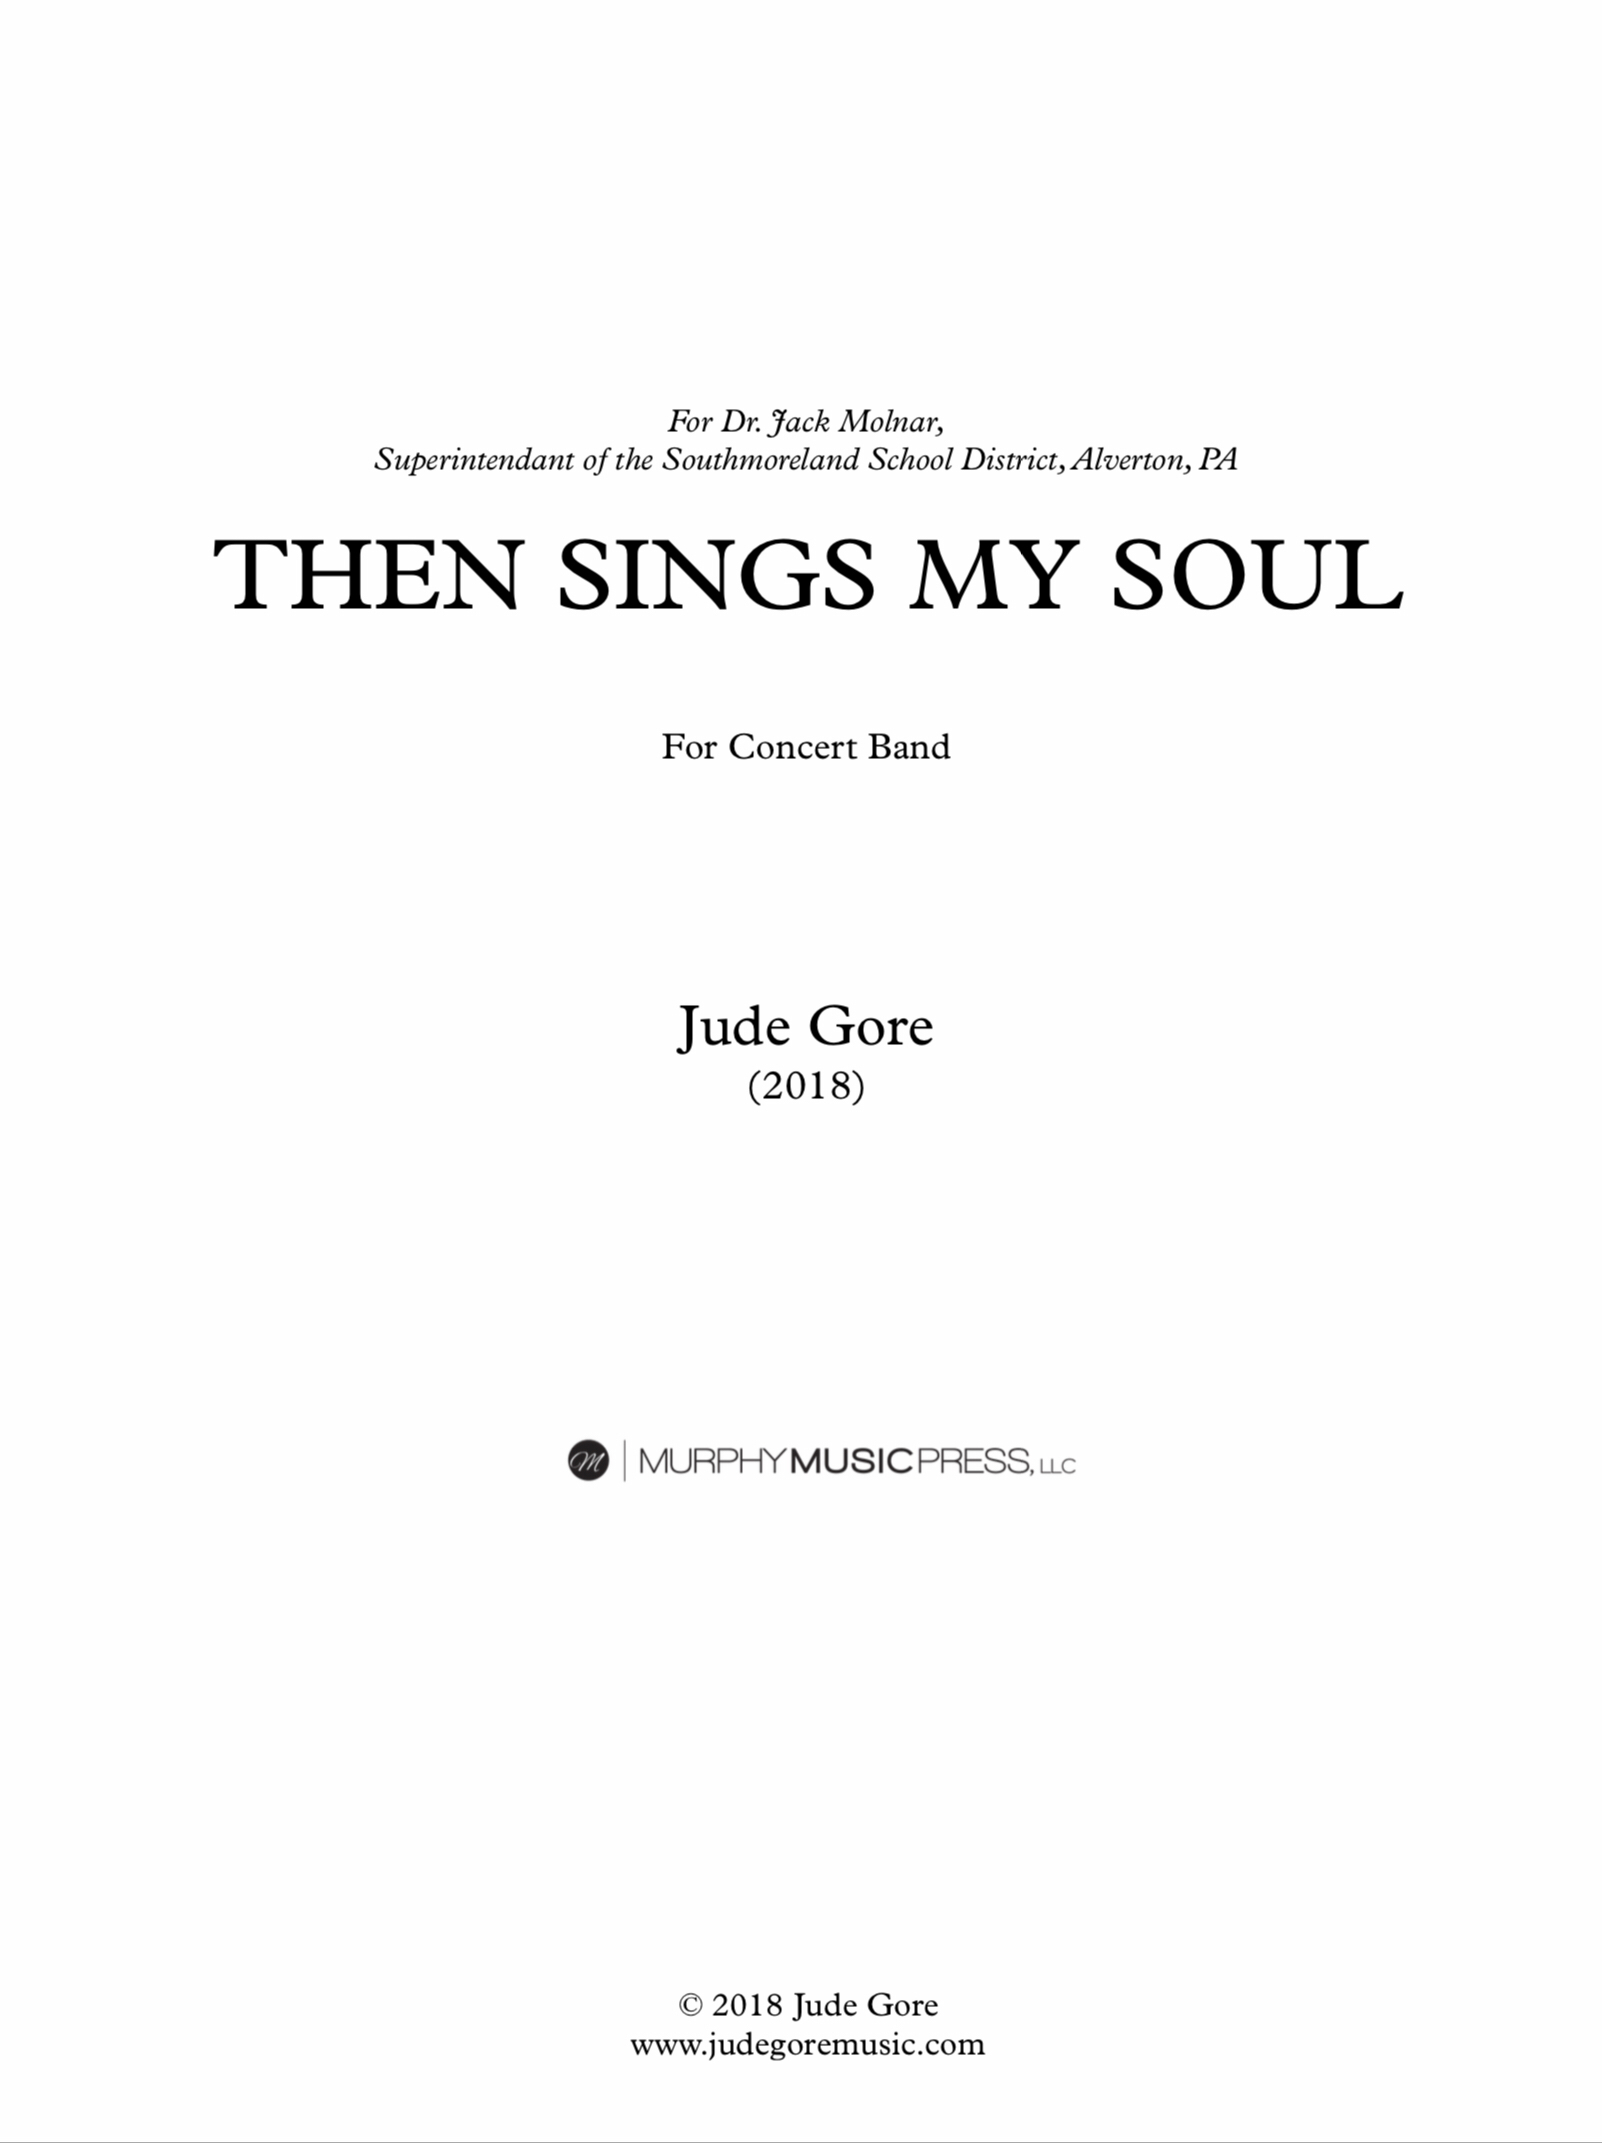 Then Sings My Soul (Score Only) by Jude Gore